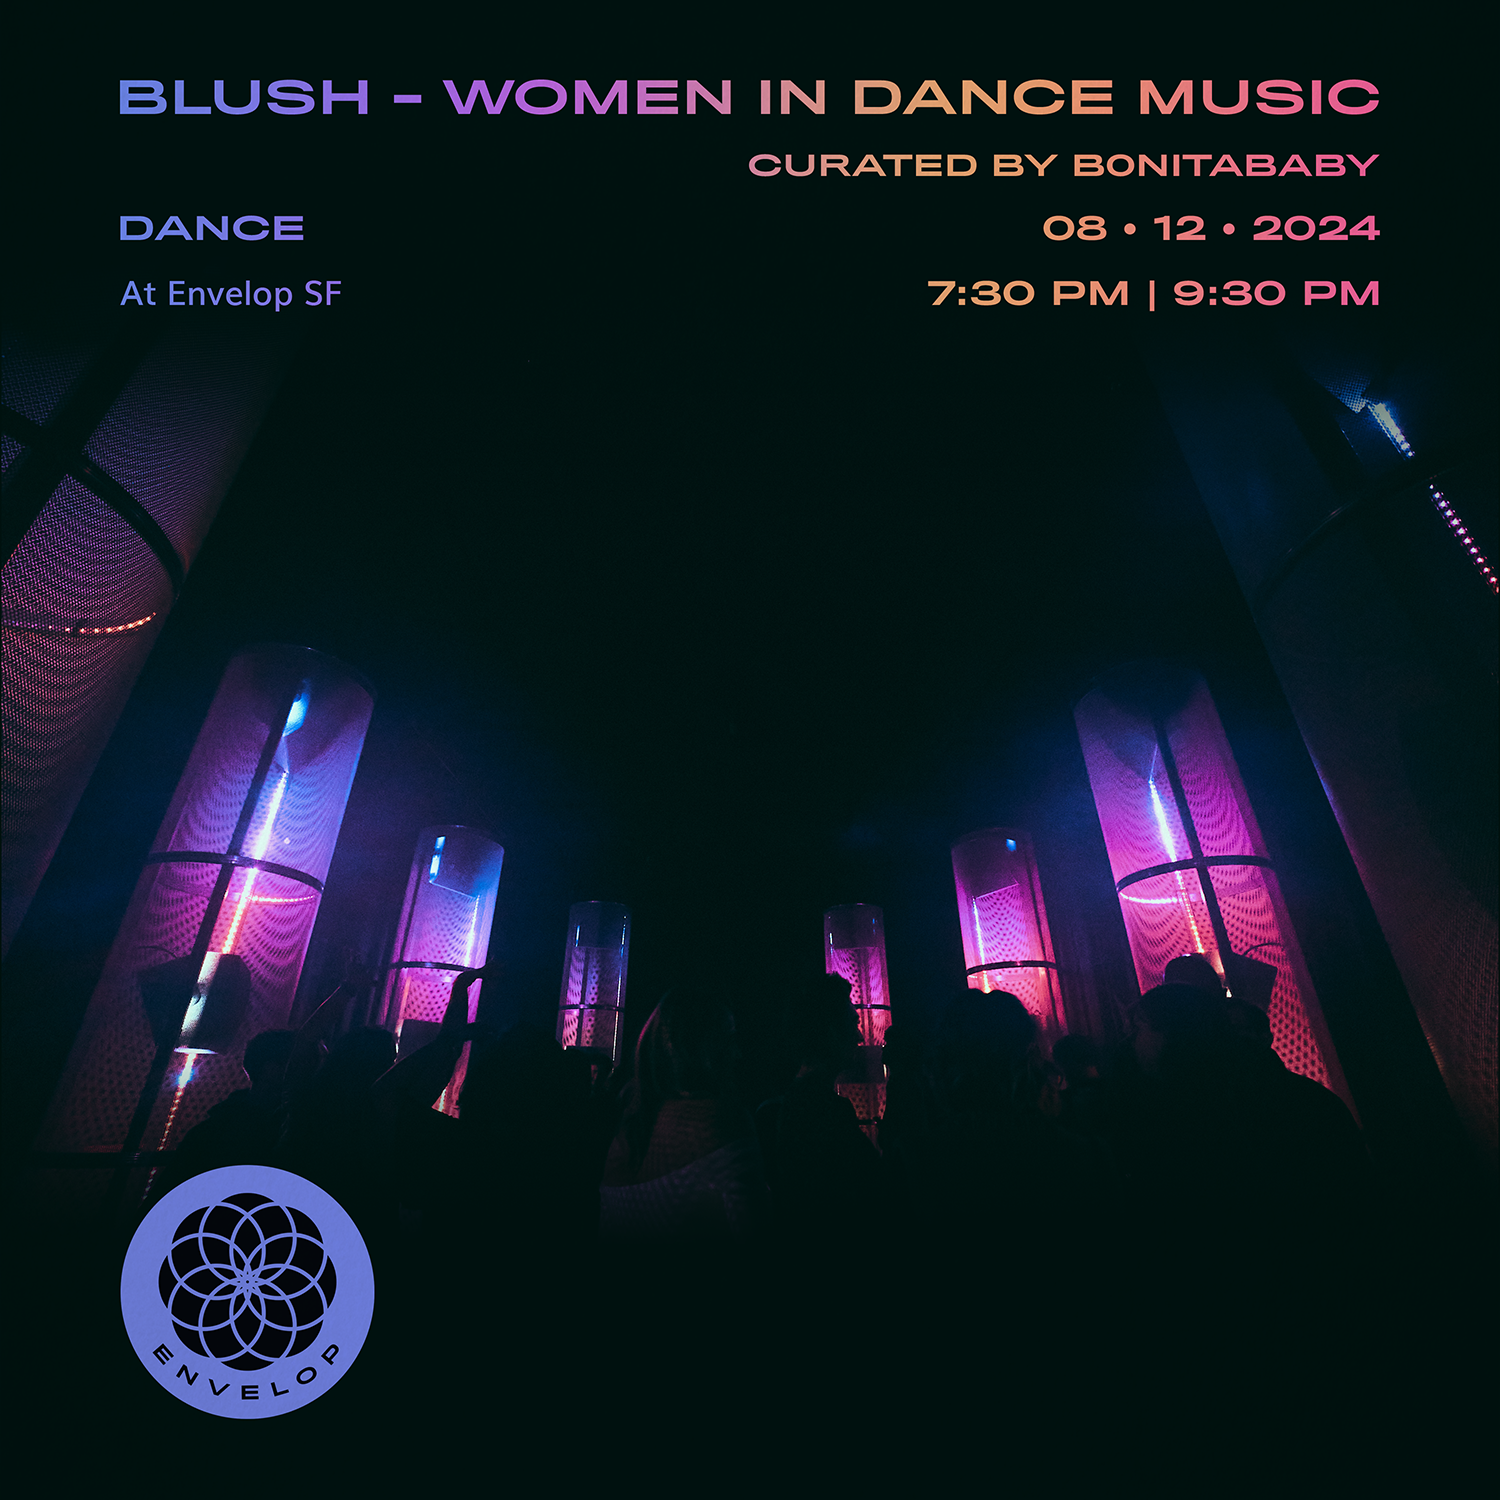 Event image for  blush - Women in Dance Music curated by b0nitababy : DANCE